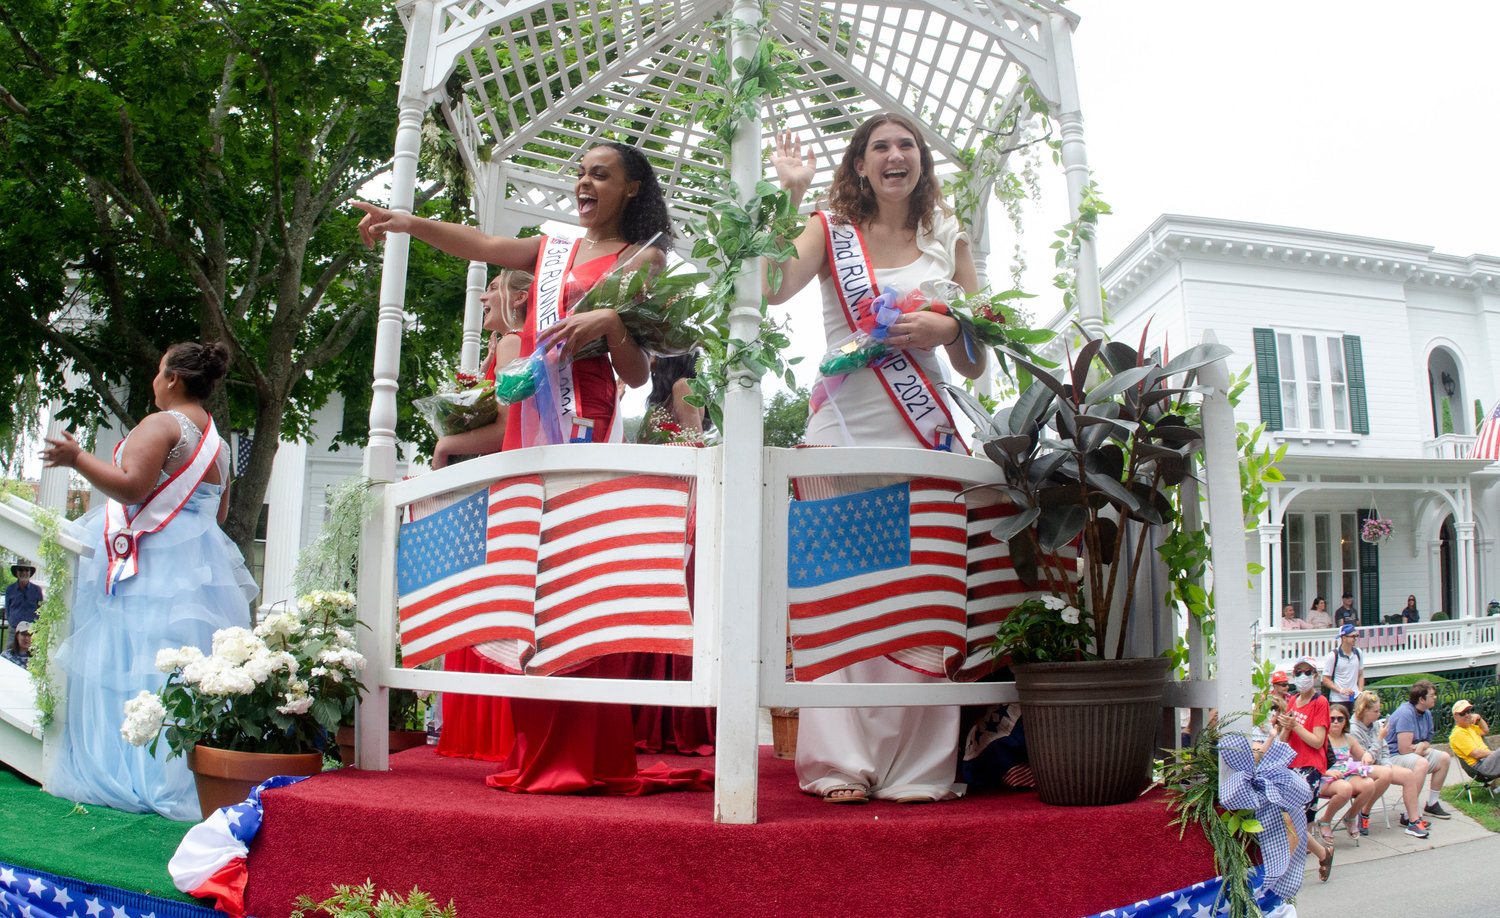 Having a ball atop the Miss Fourth float are Emily Almonte (left) and Samantha Martins.